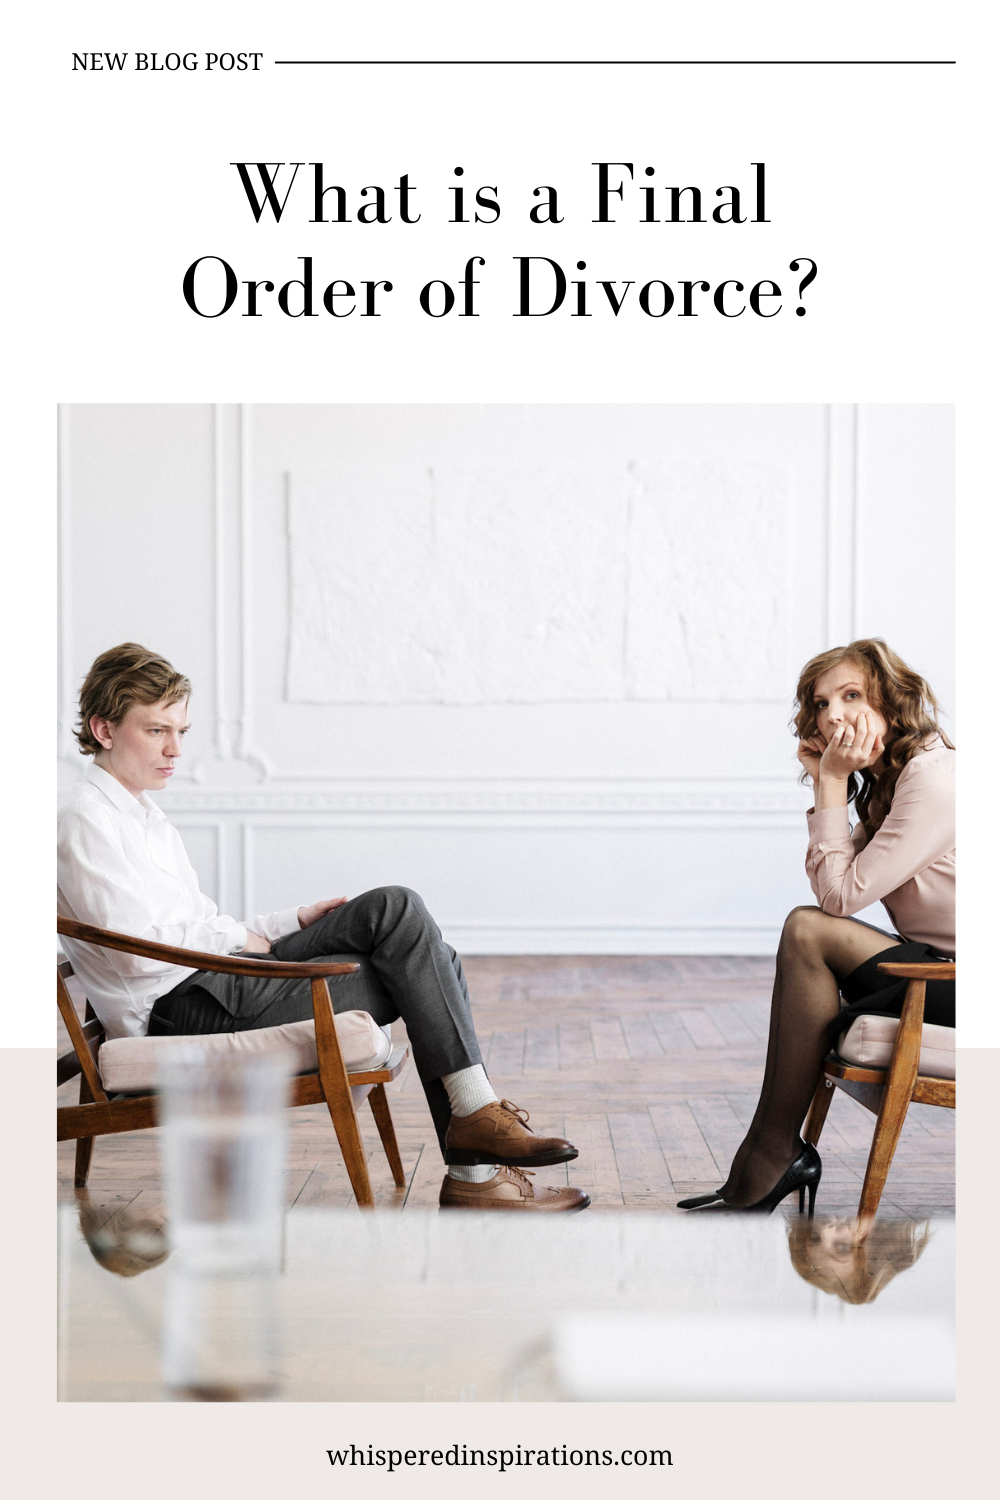 A couple sit across from each other in a counseling session, they are not looking at each other and look fed up. This article answers, what is a final order of divorce?